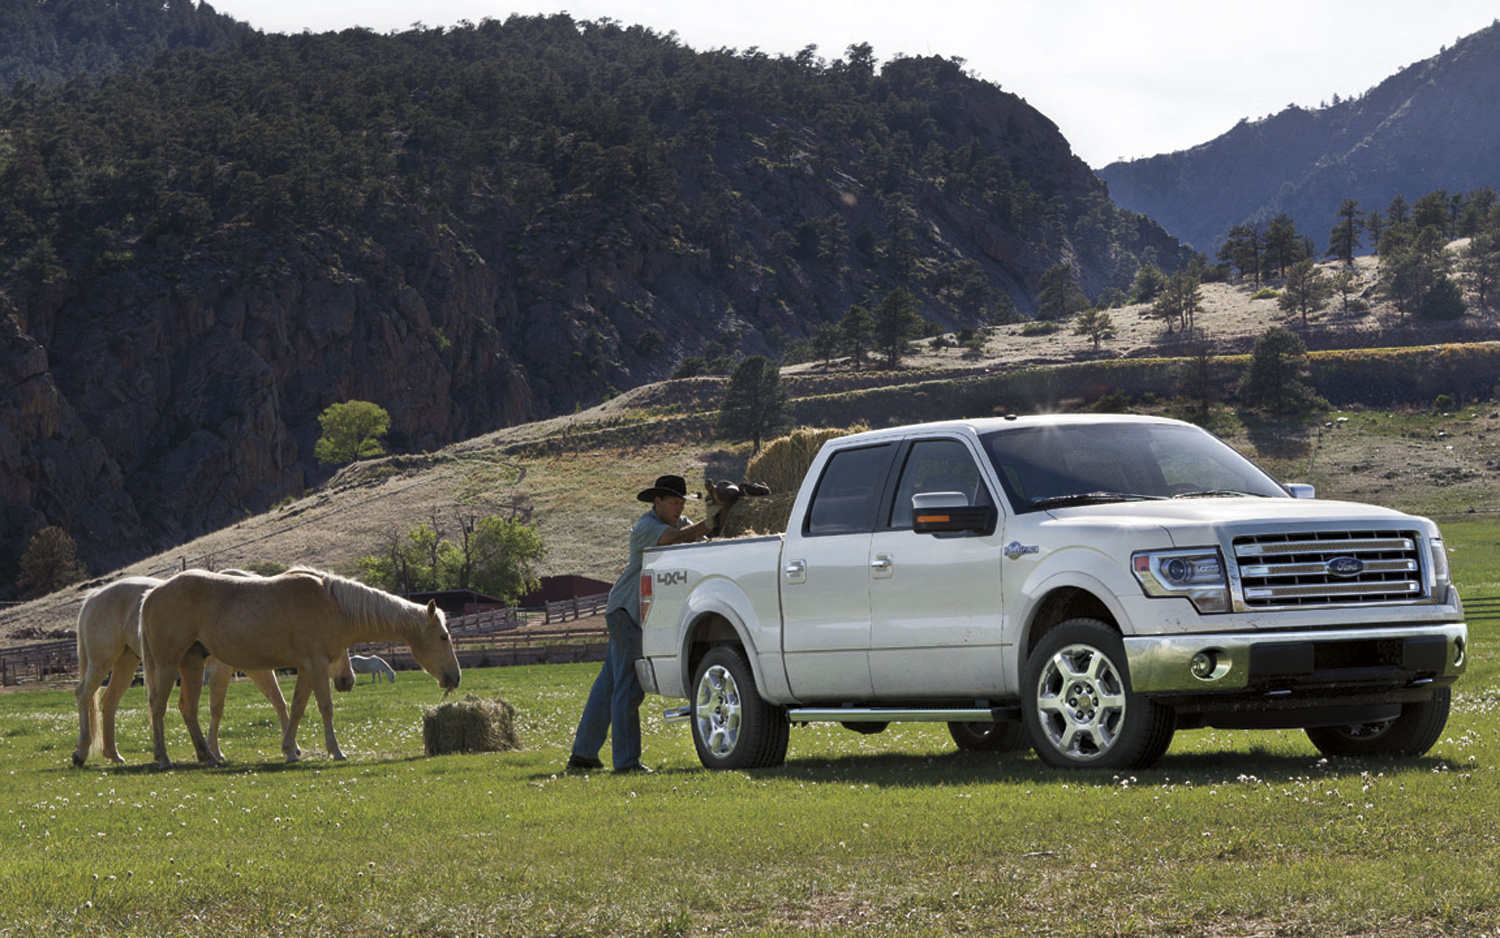 F-150 King Ranch: the Truck That Defines Authentic Western Luxury and Style